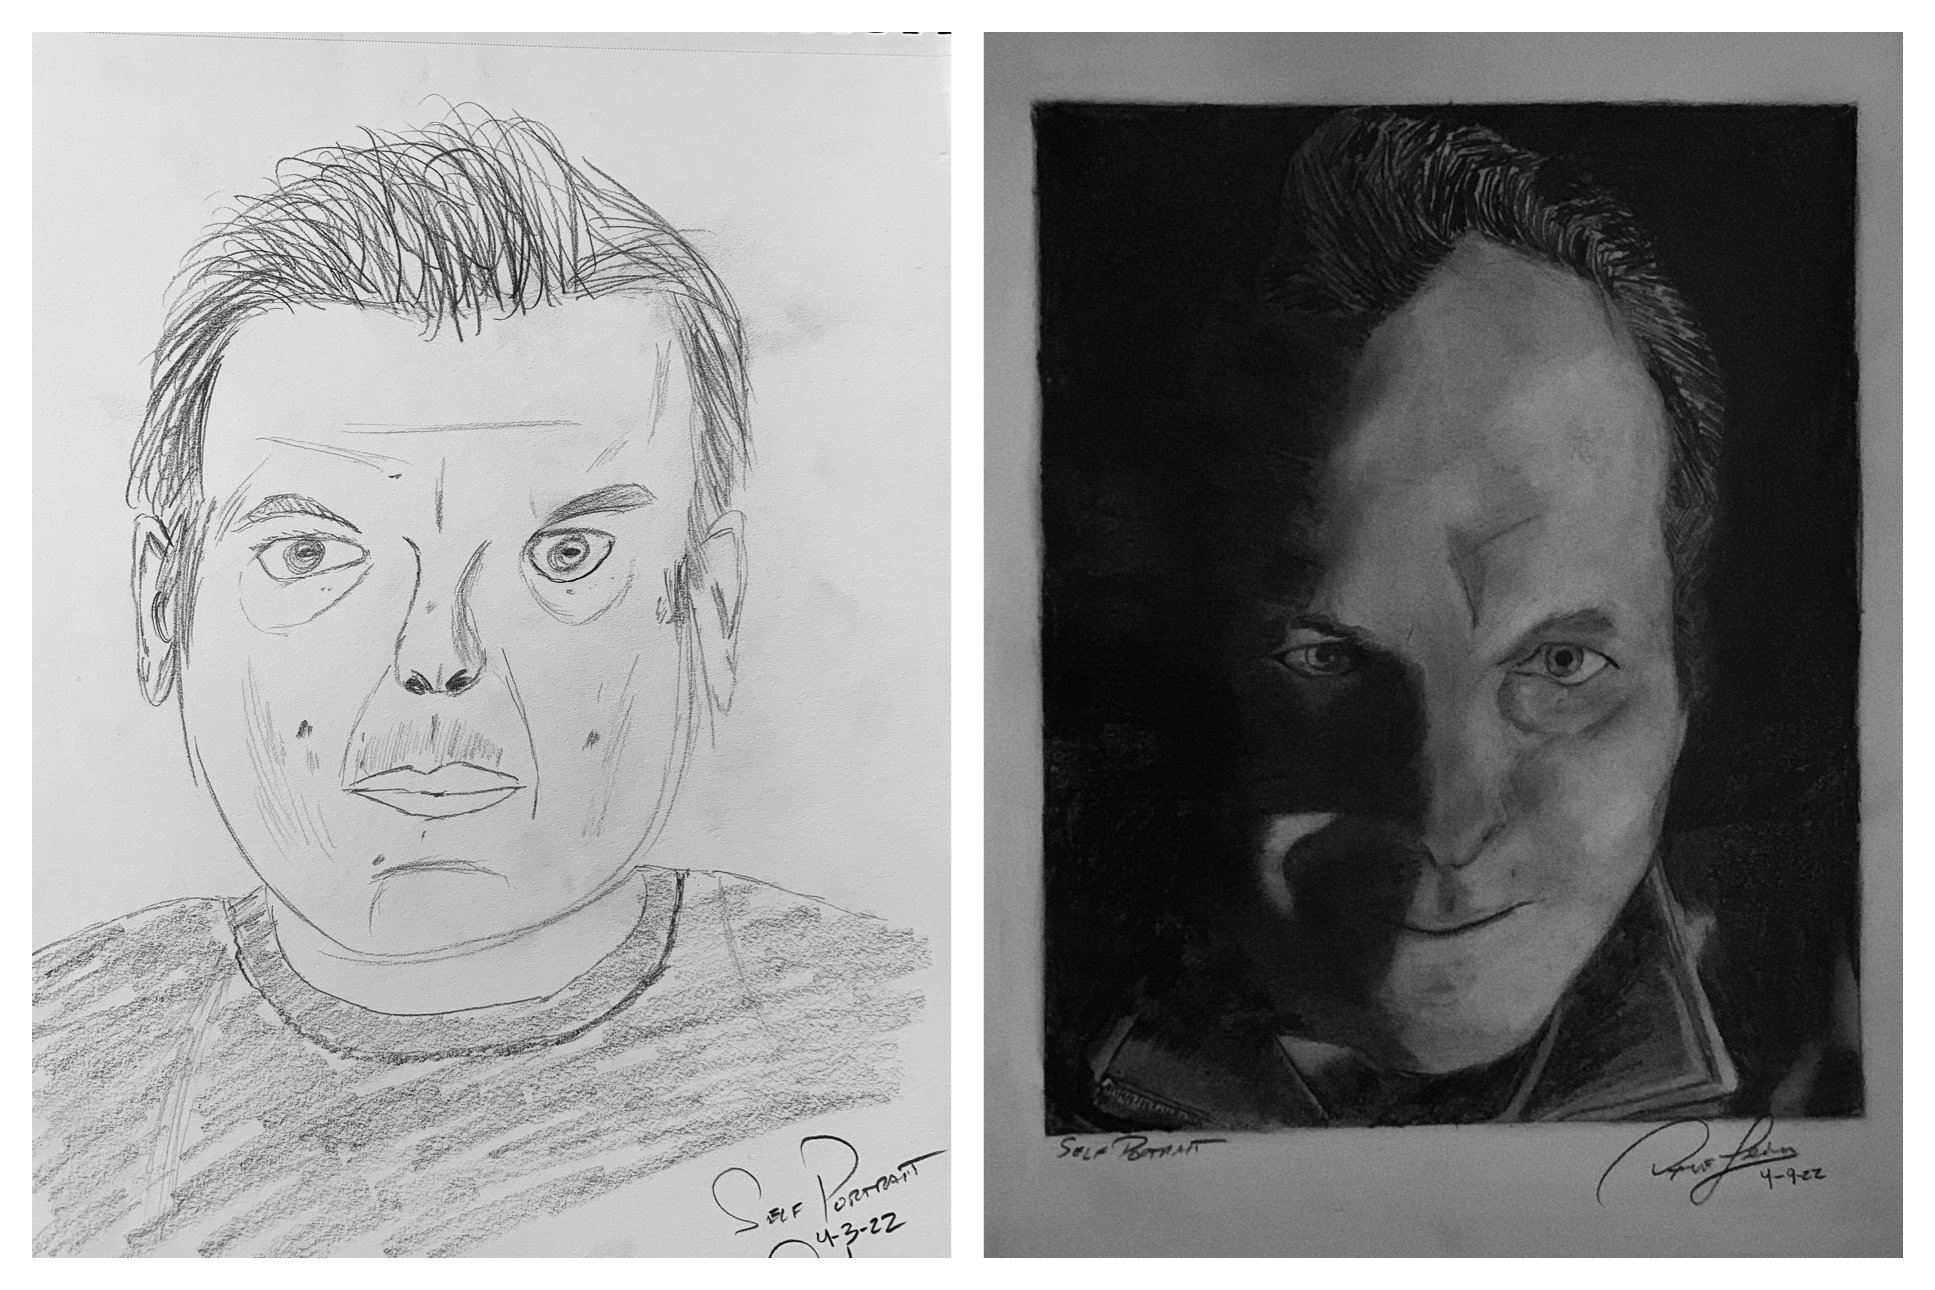 David's Before and After self-portraits April 4-9, 2022